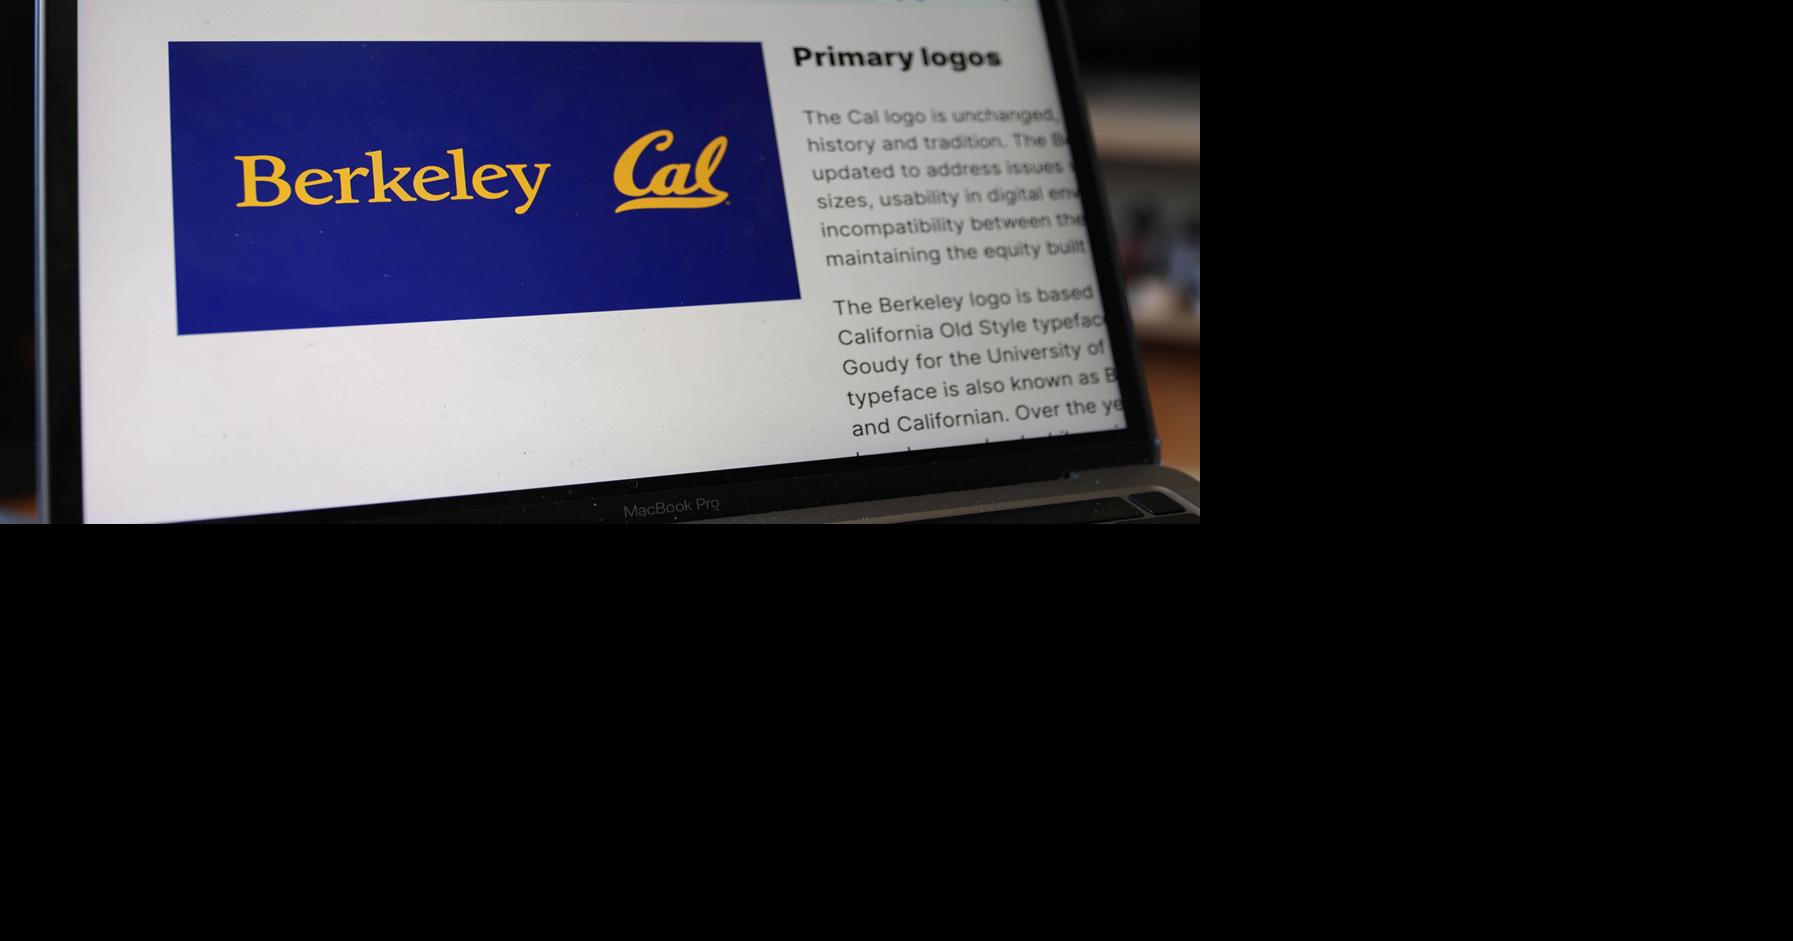 ‘Kind of ugly’: UC Berkeley reveals new logo, causes backlash | Campus ...